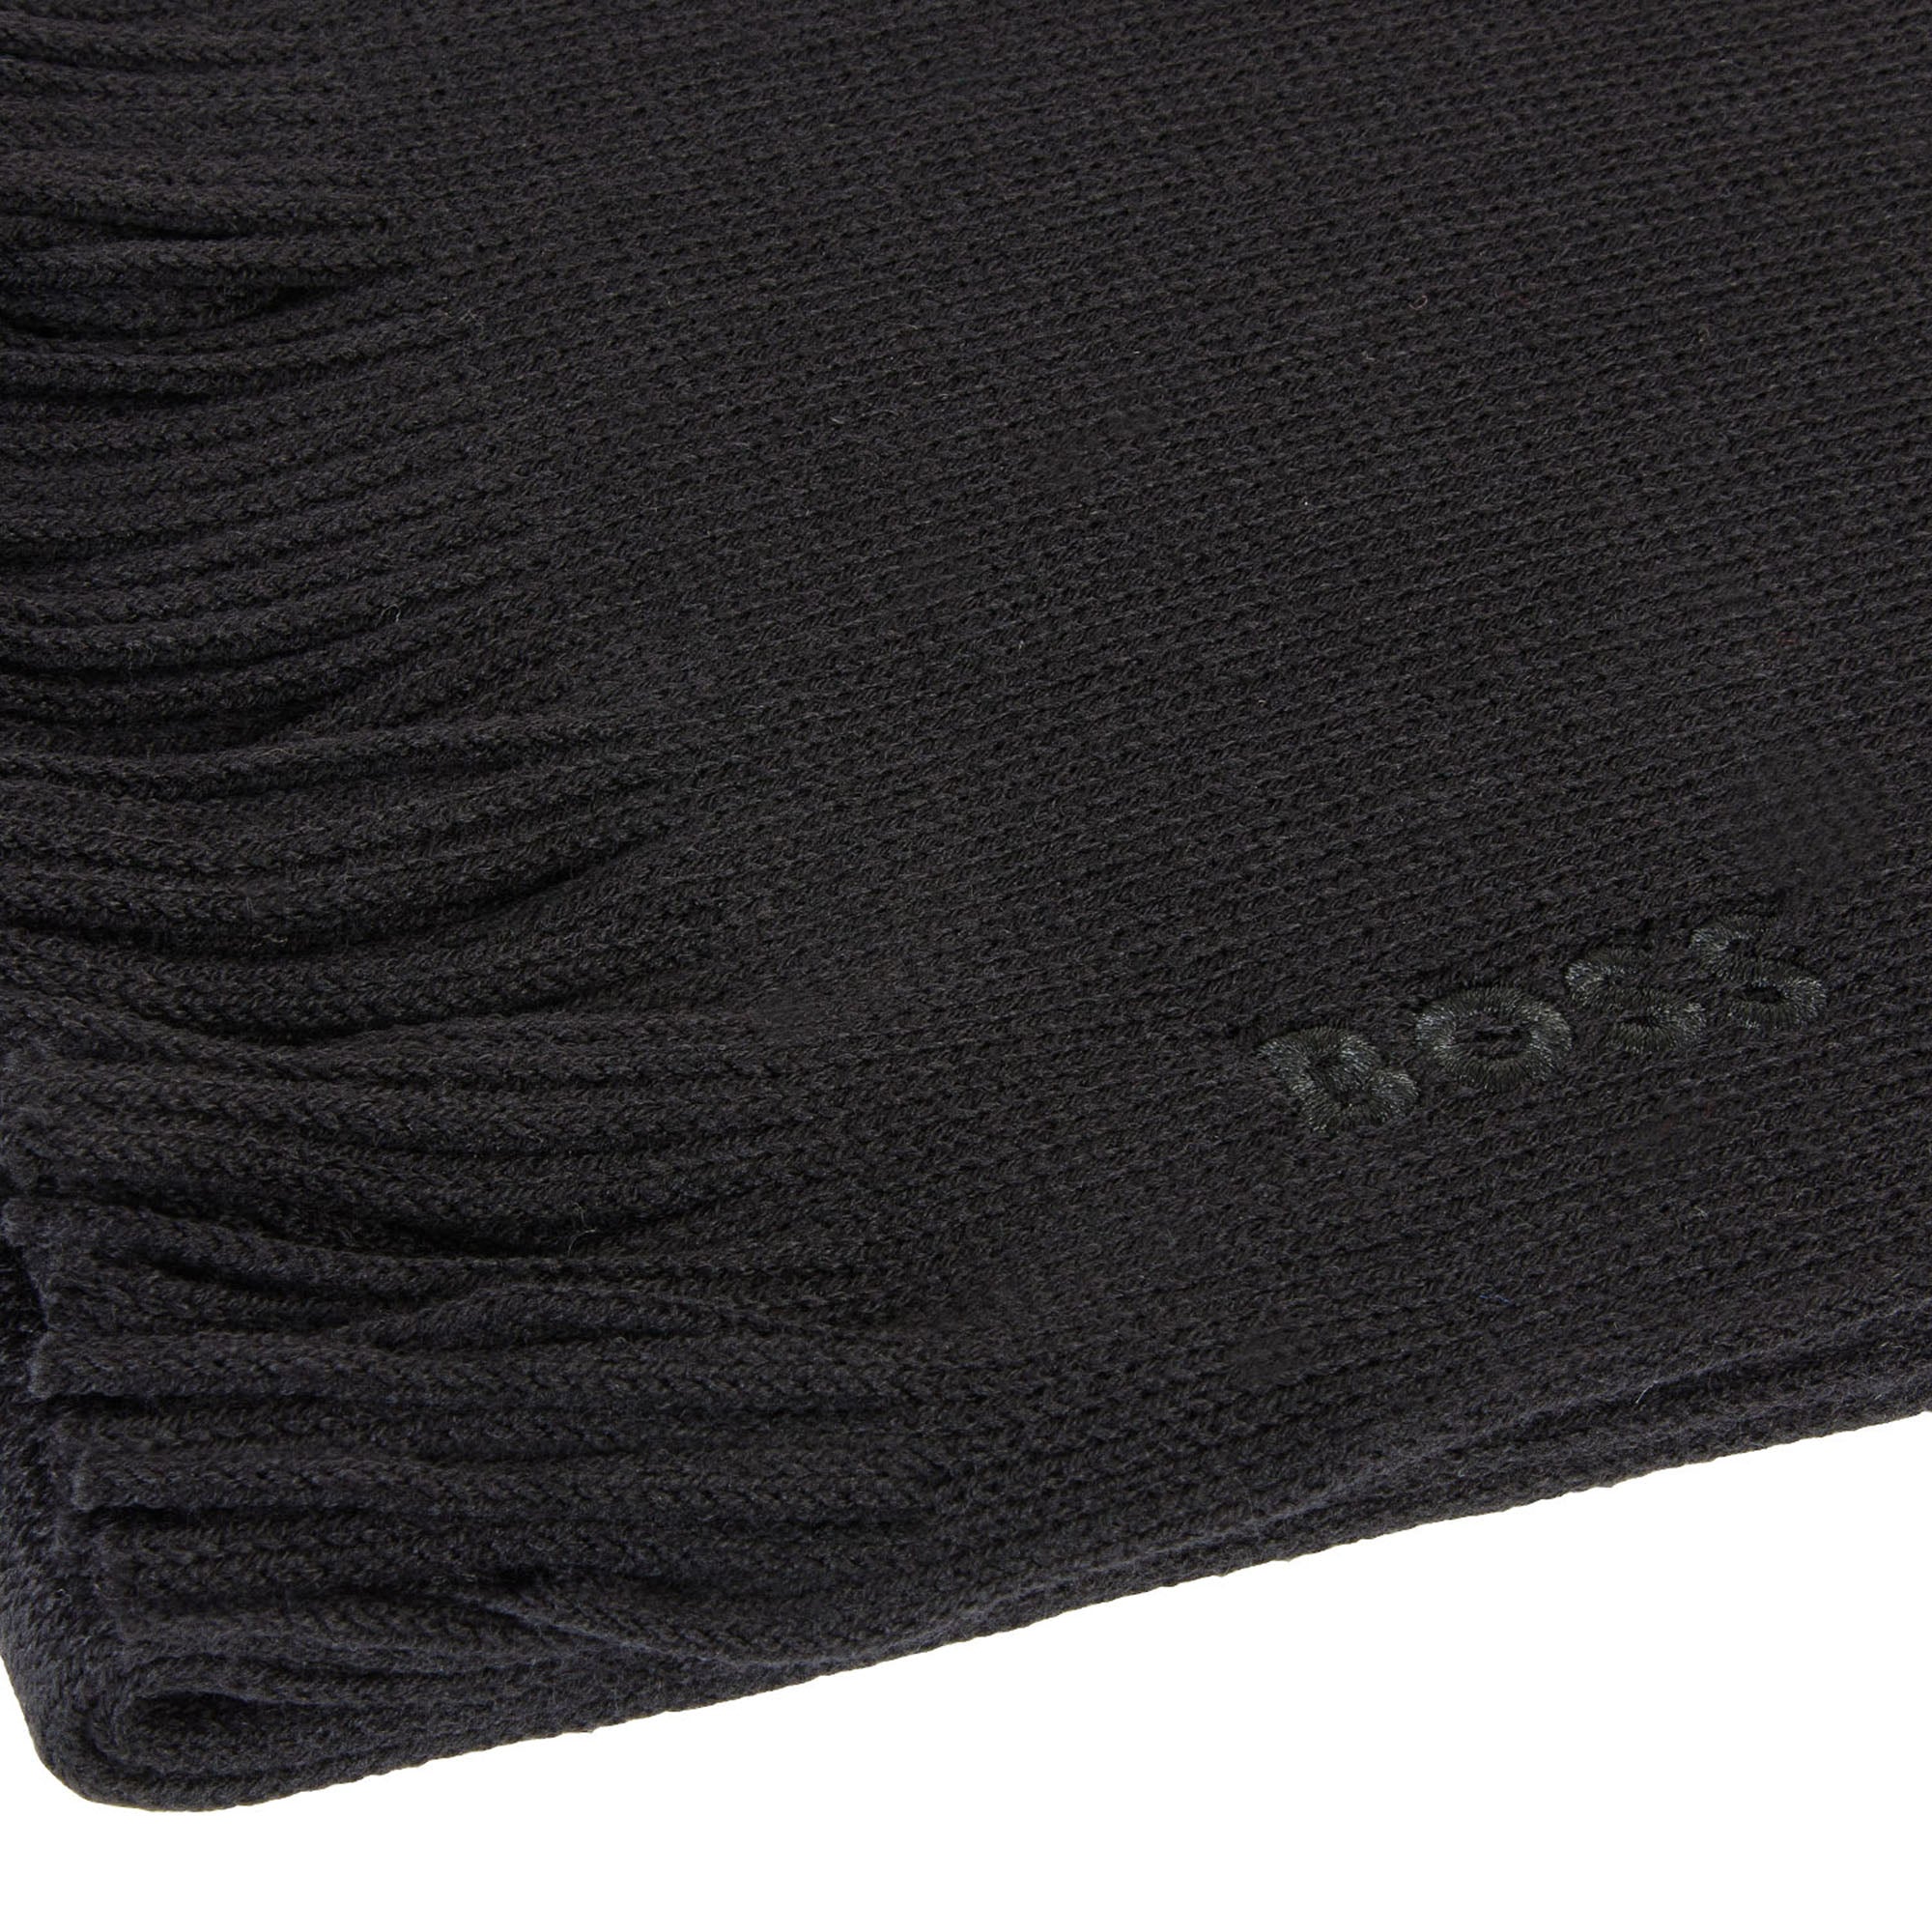 Hugo Boss Mens Wooly Scarf Black One Size